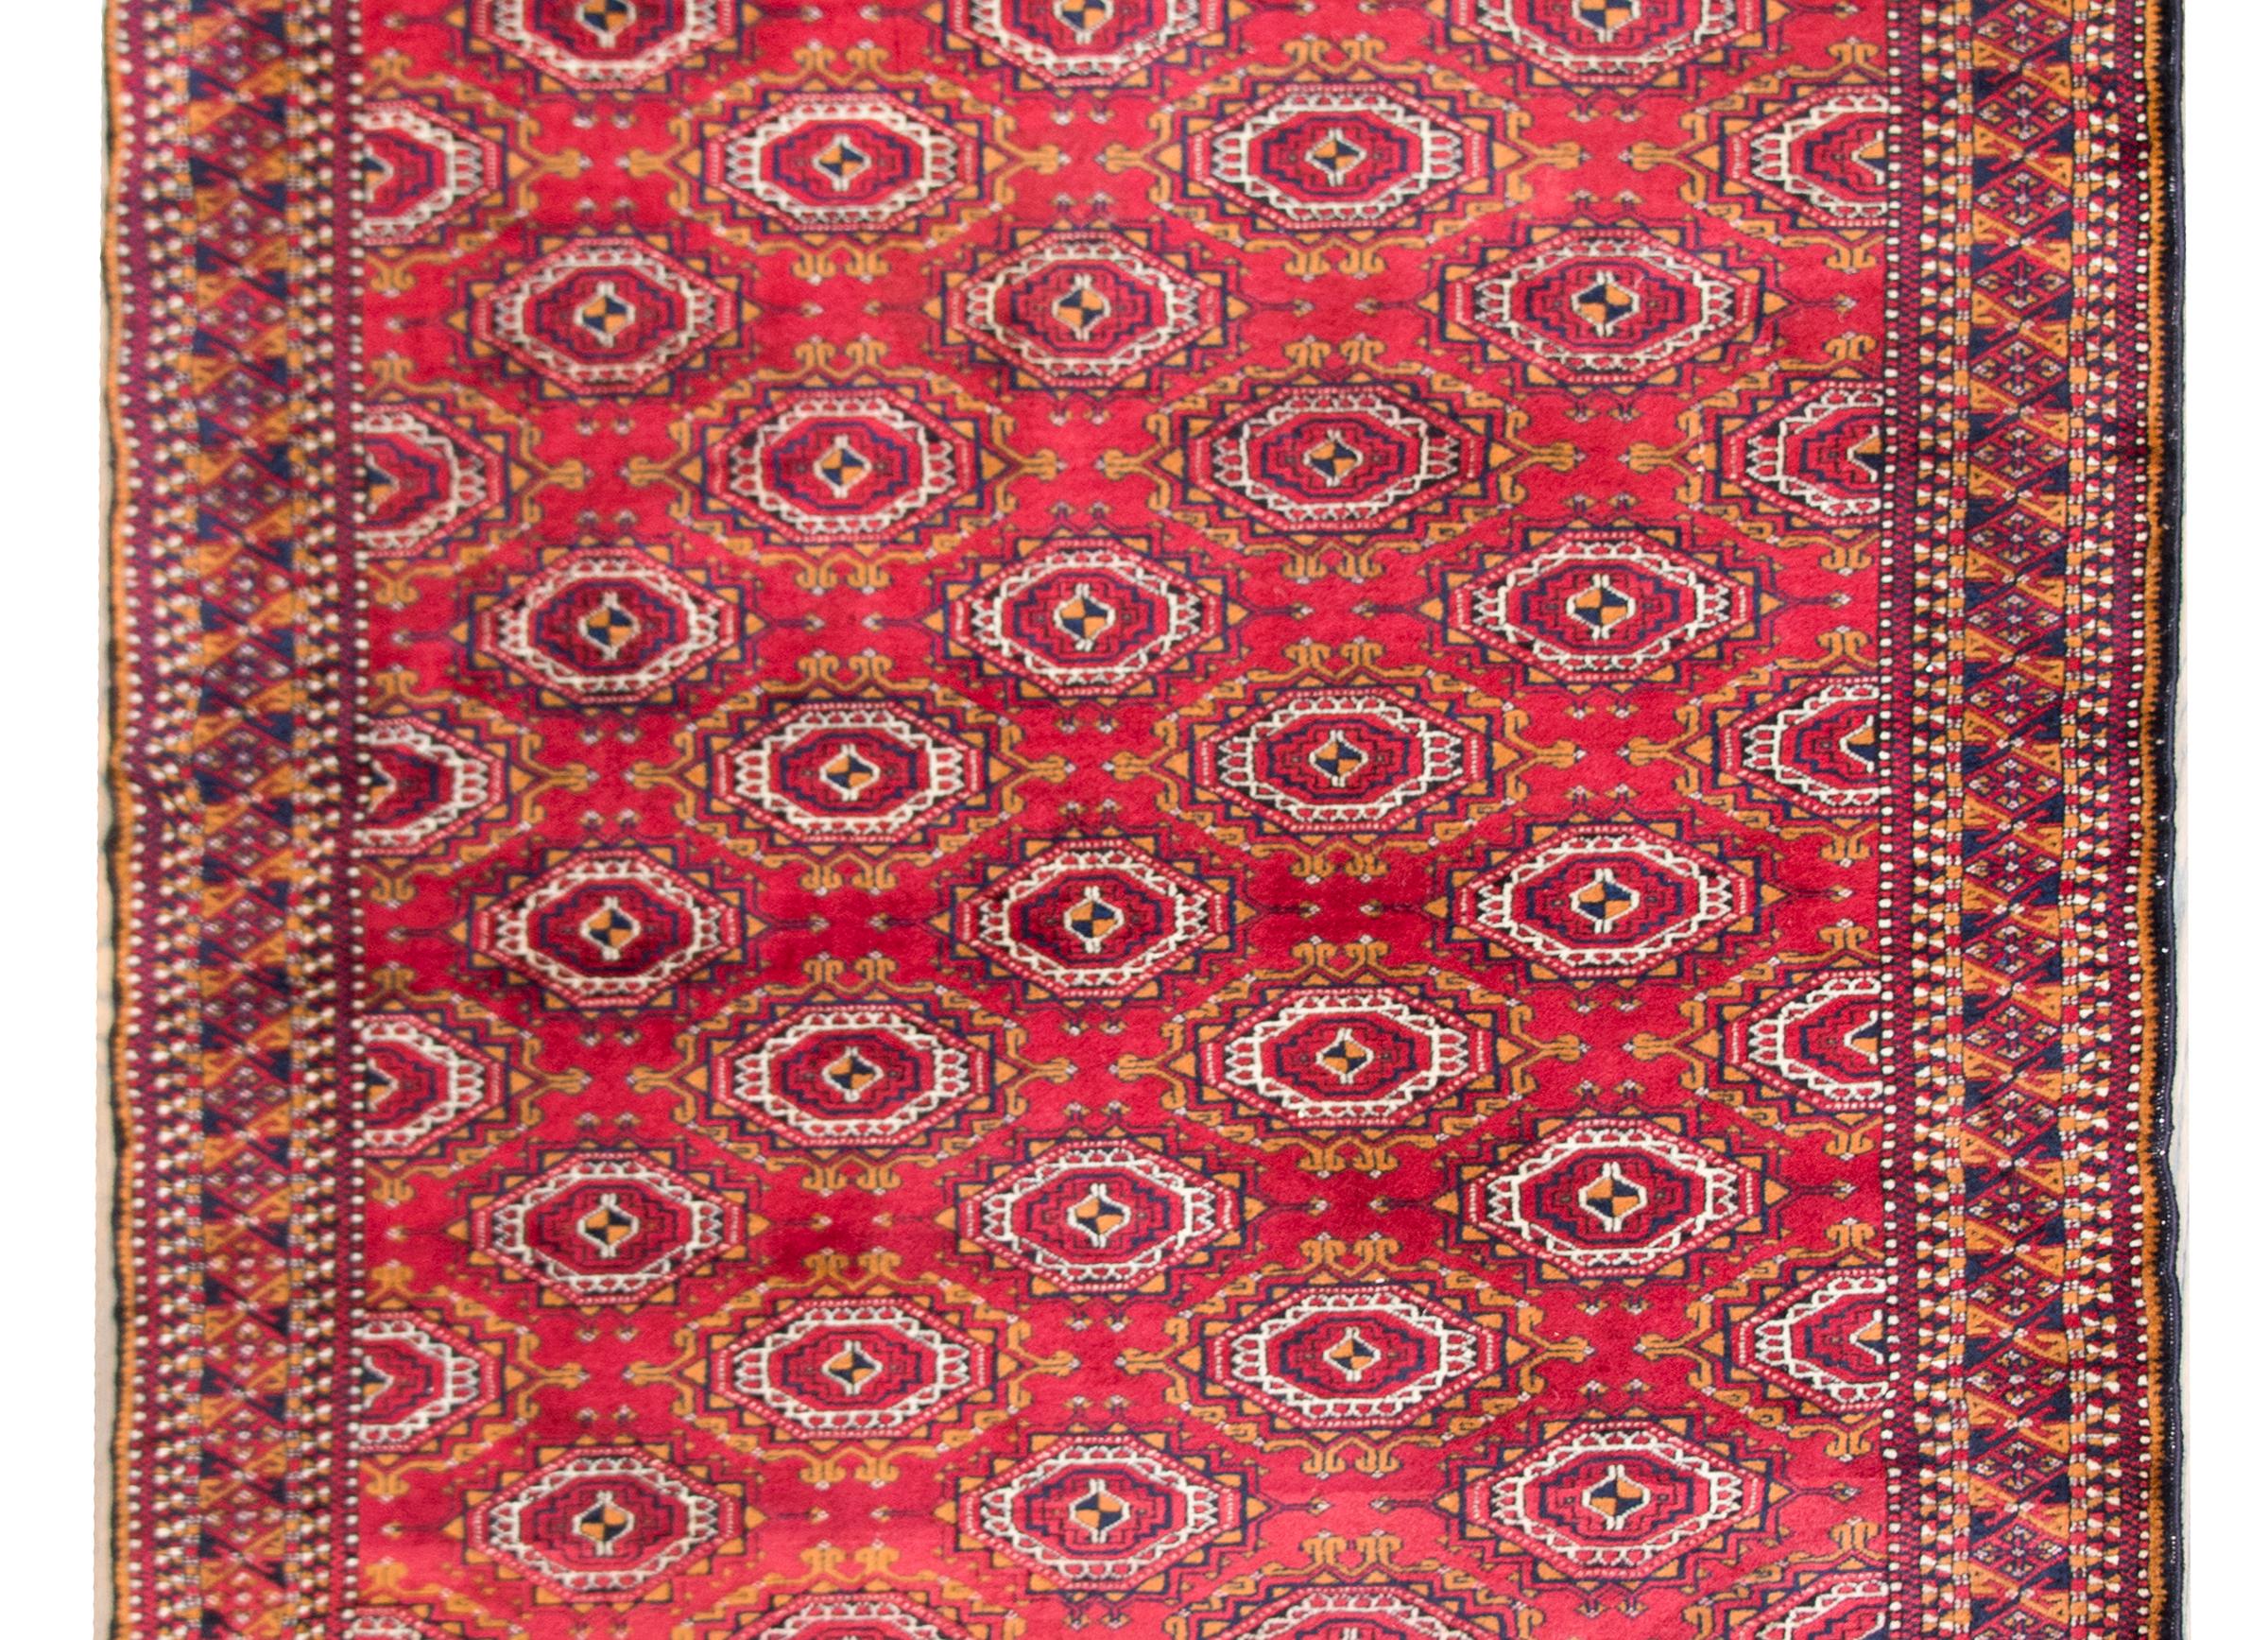 A wonderful late 20th century Persian Turkmen rug with an all-over stylized floral pattern surrounded by a complex border with multiple petite geometric and stylized floral patterns, and all woven in crimson, gold, black, and white wool.